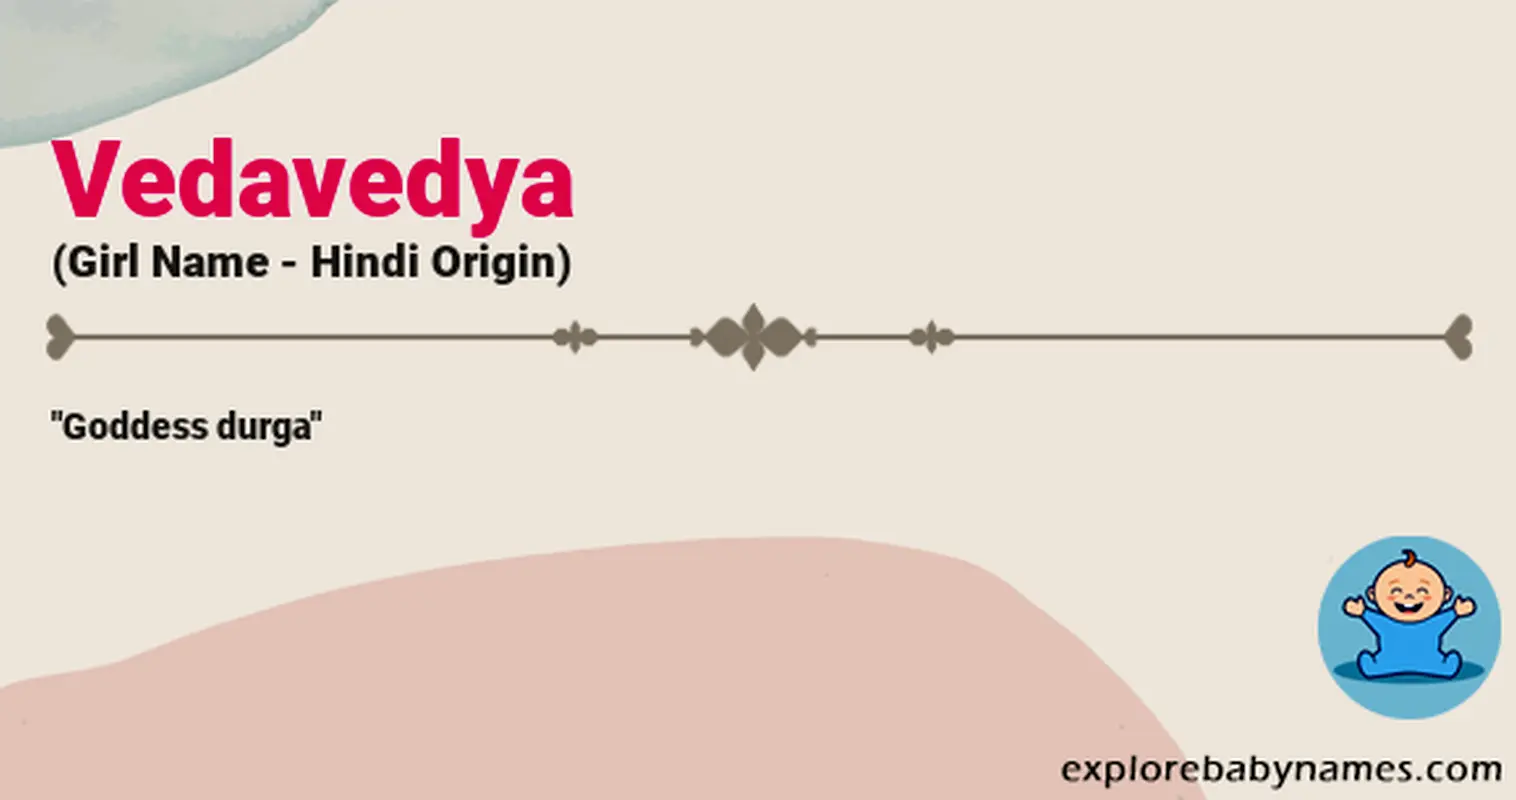 Meaning of Vedavedya